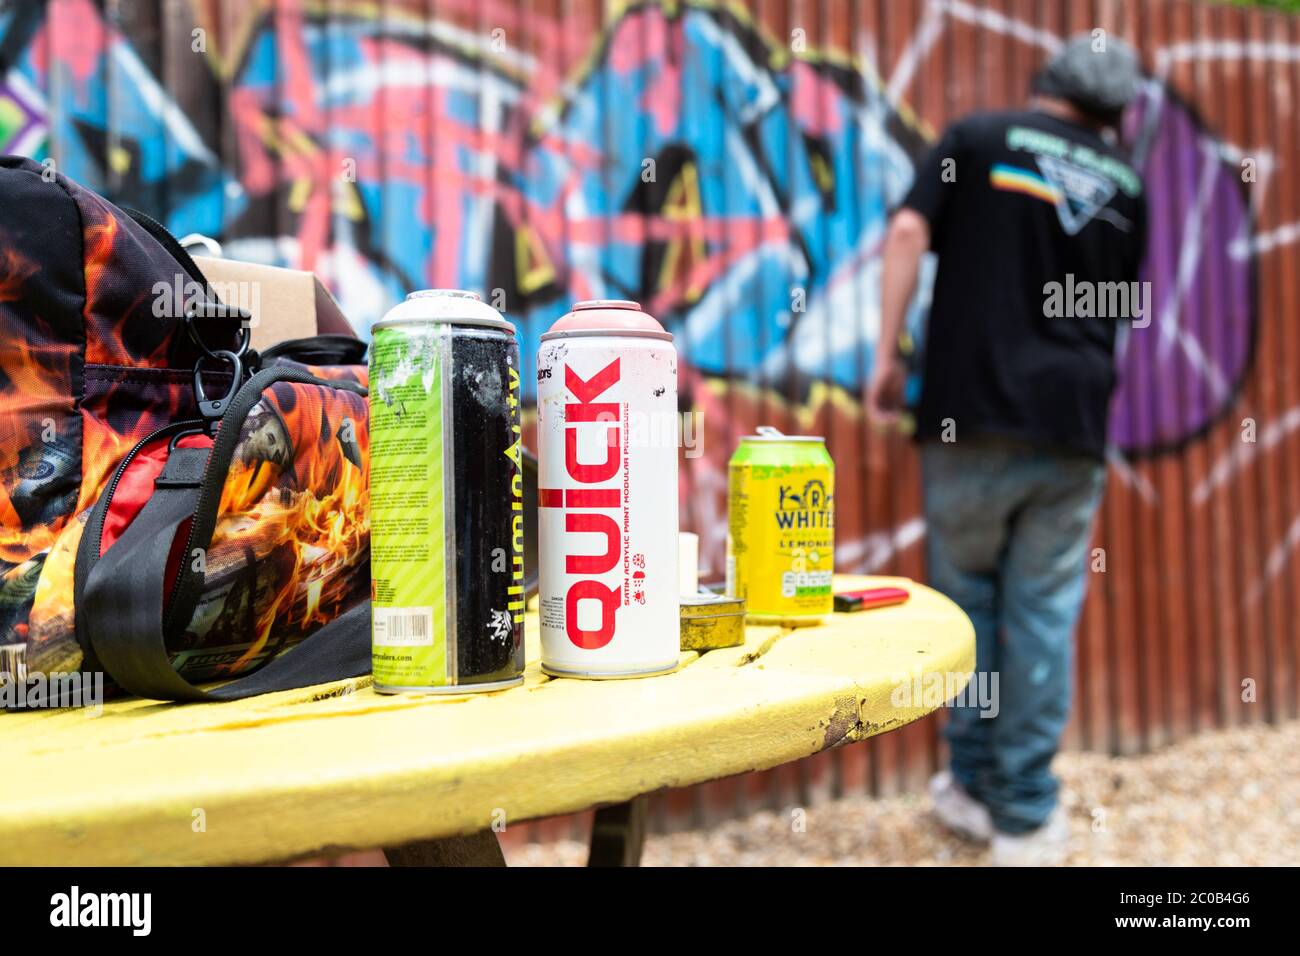 Spray can paint used by a graffiti artist Stock Photo